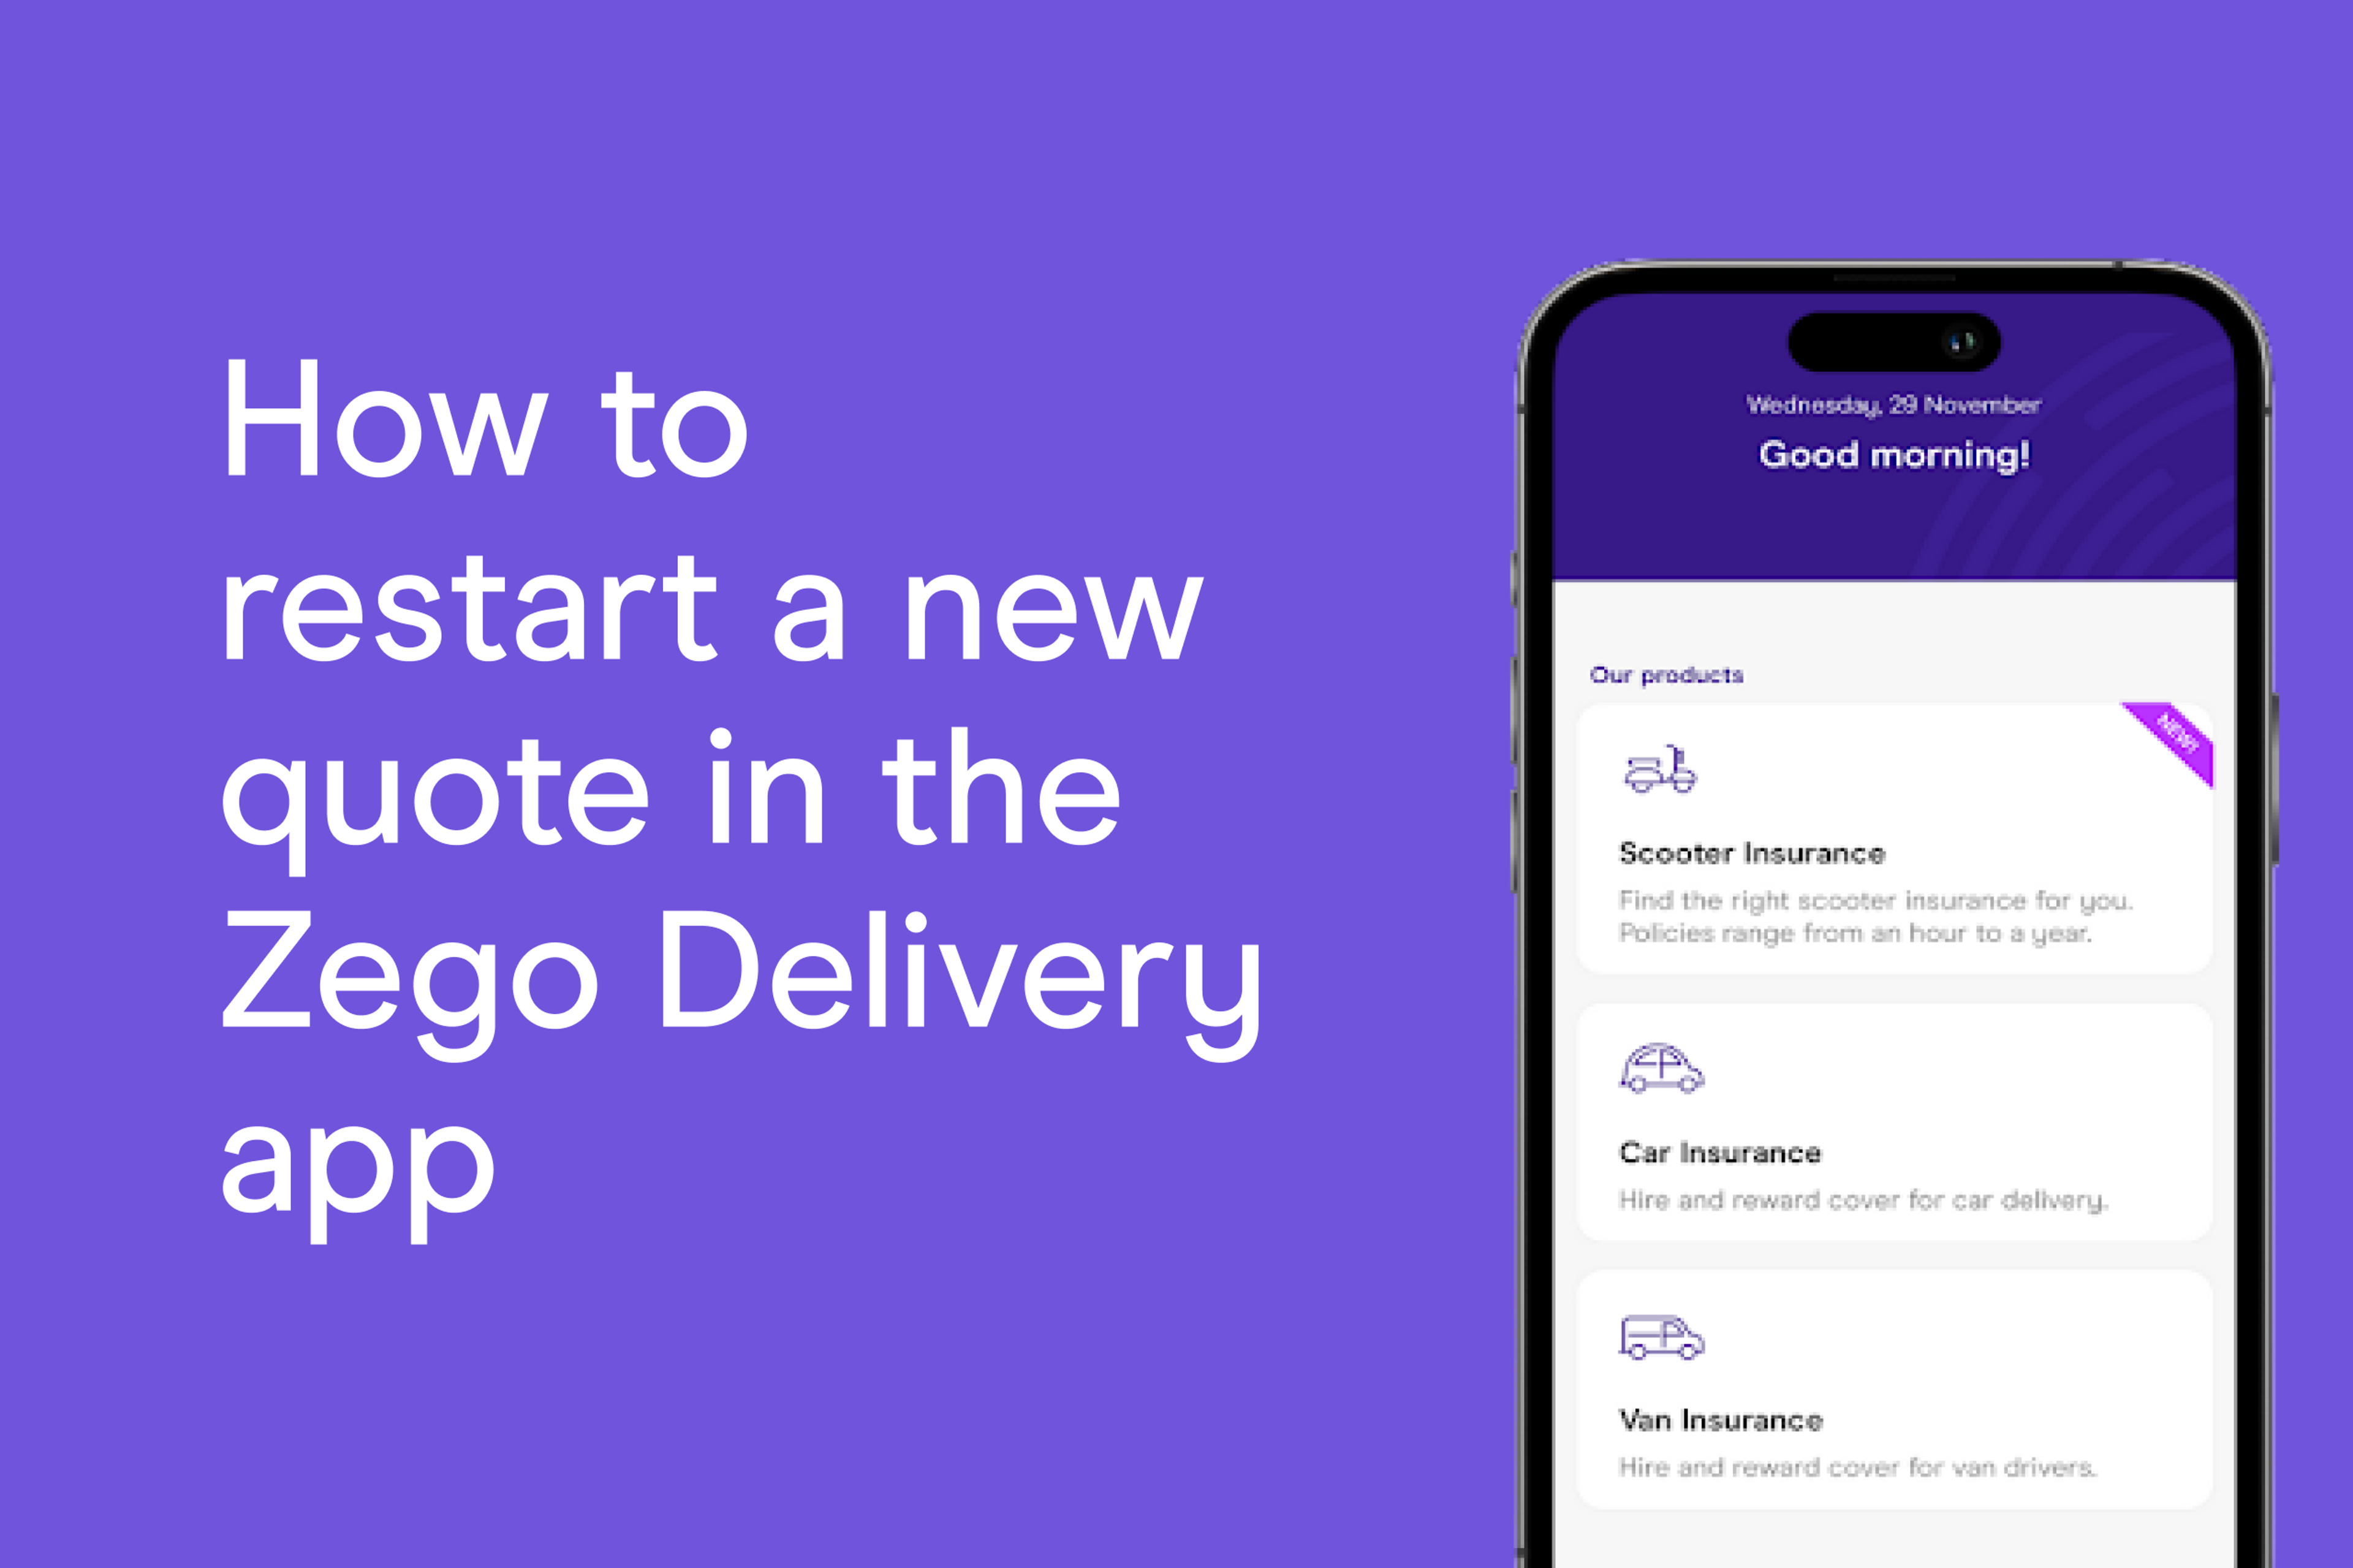 How to delete and restart a new quote in the Zego Delivery app